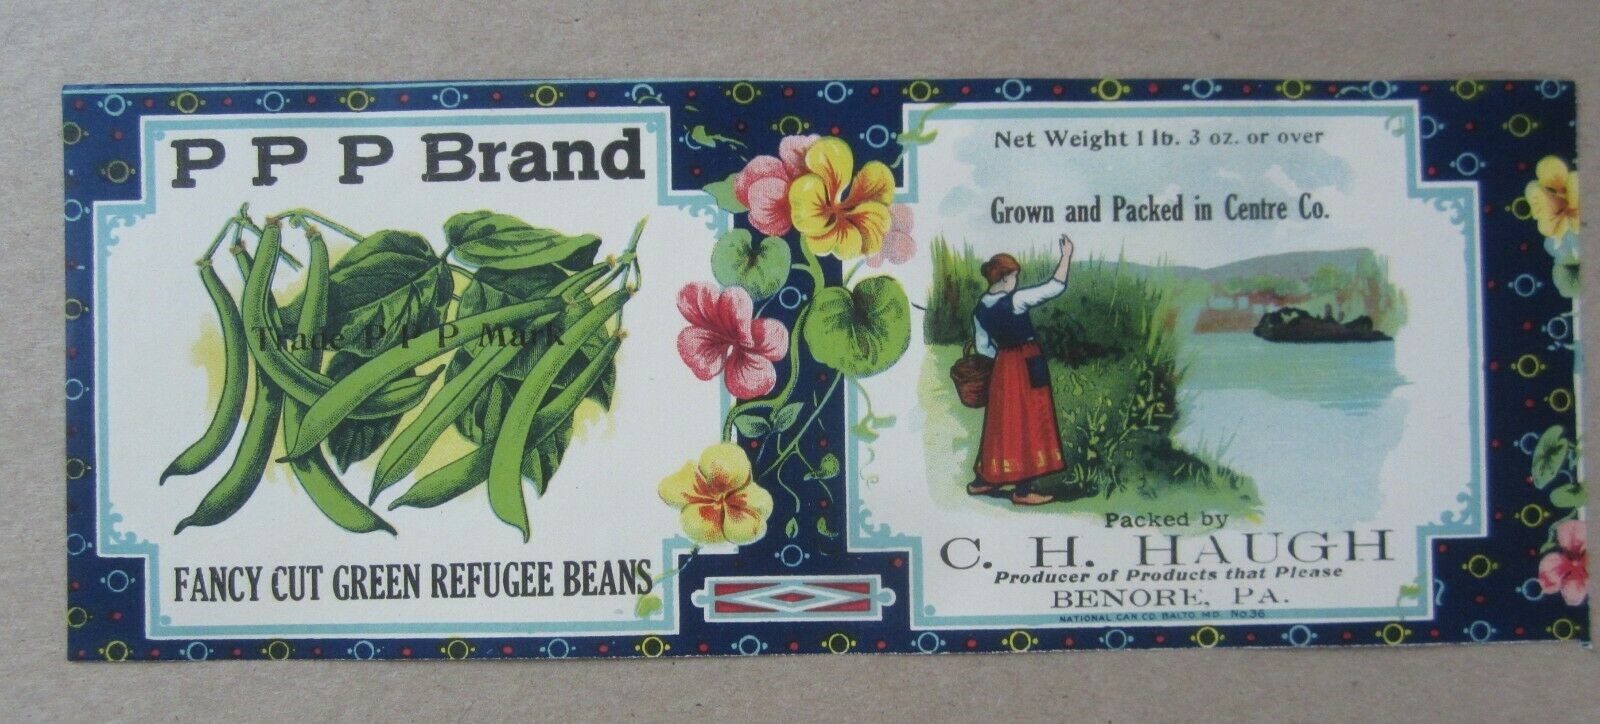 Old Vintage c.1910 - PPP Brand Green Beans CAN ...